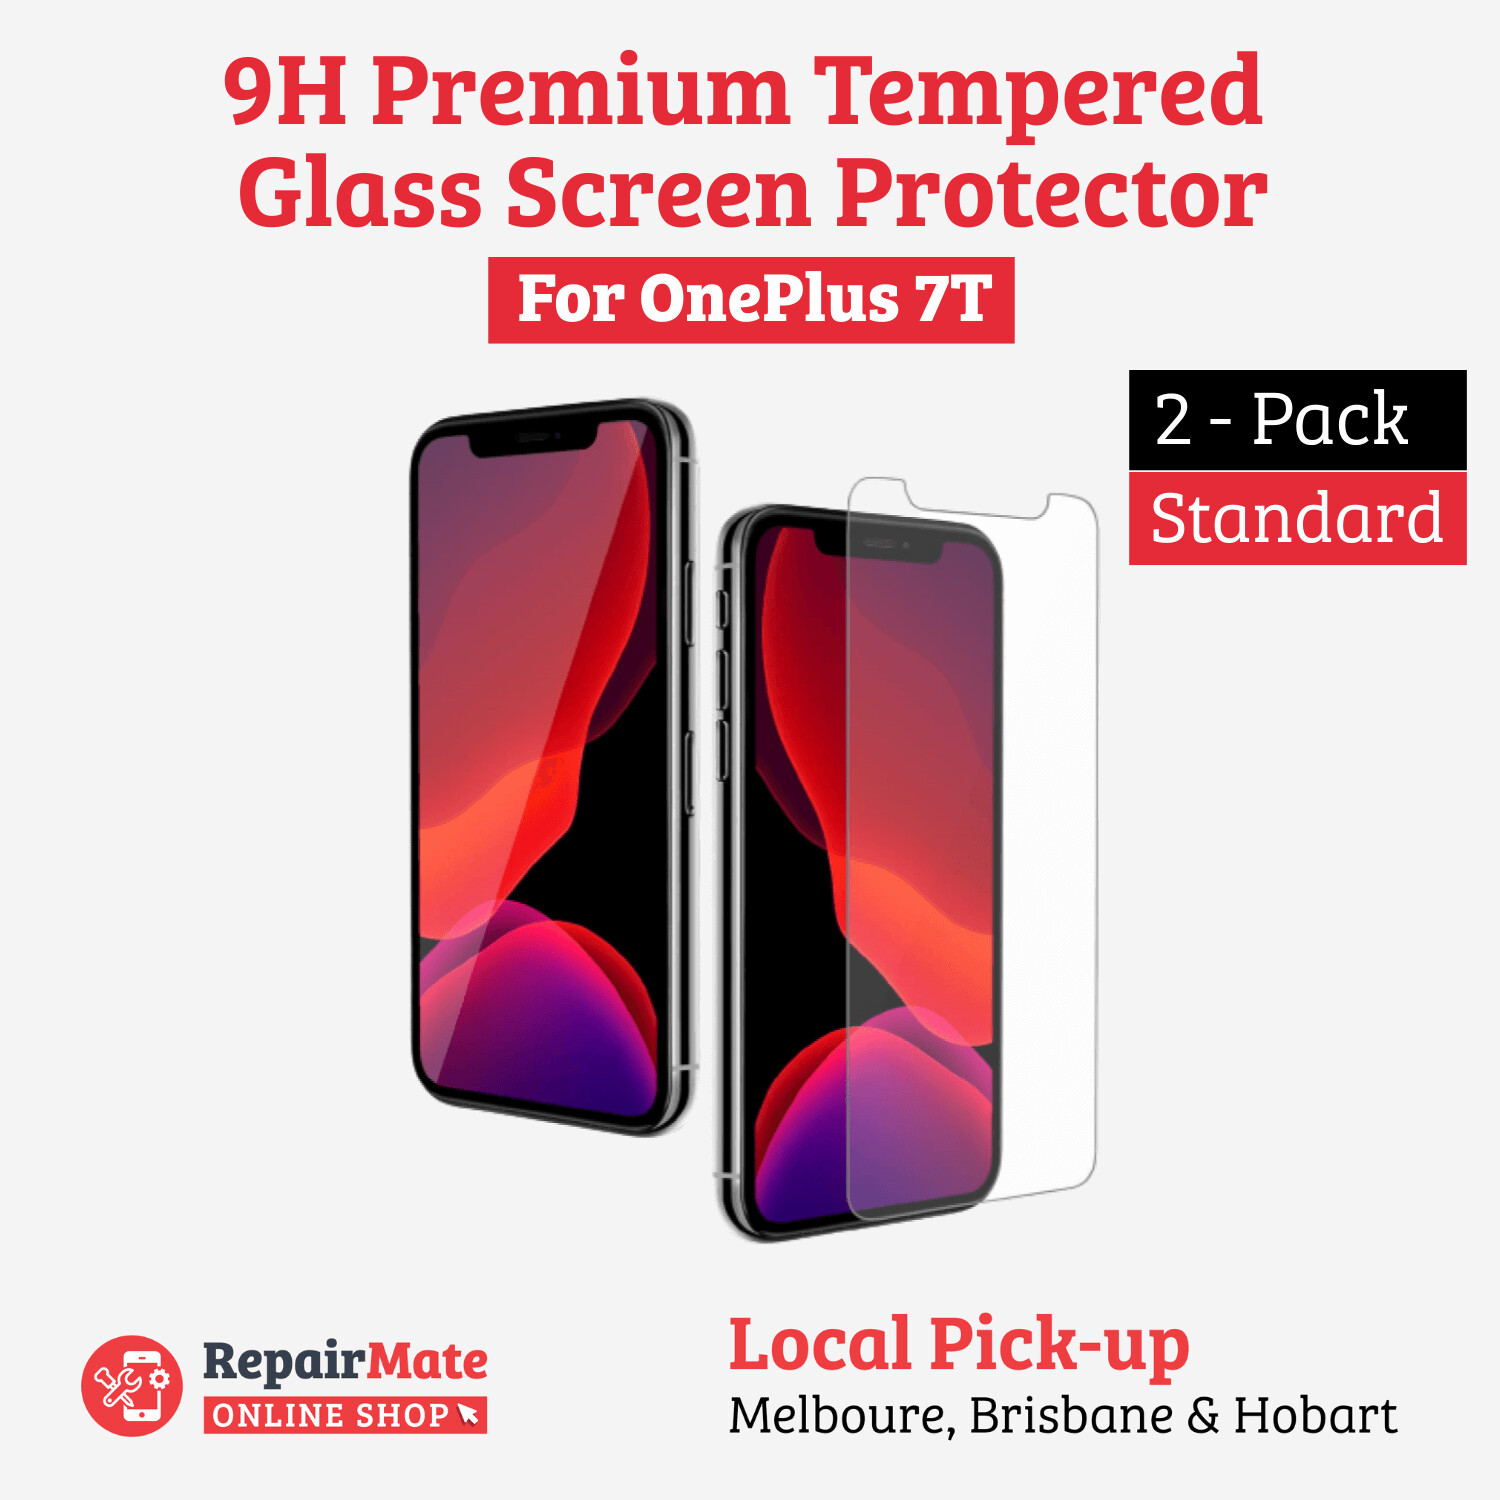 OnePlus 7T 9H Premium Tempered Glass Screen Protector [2 Pack]